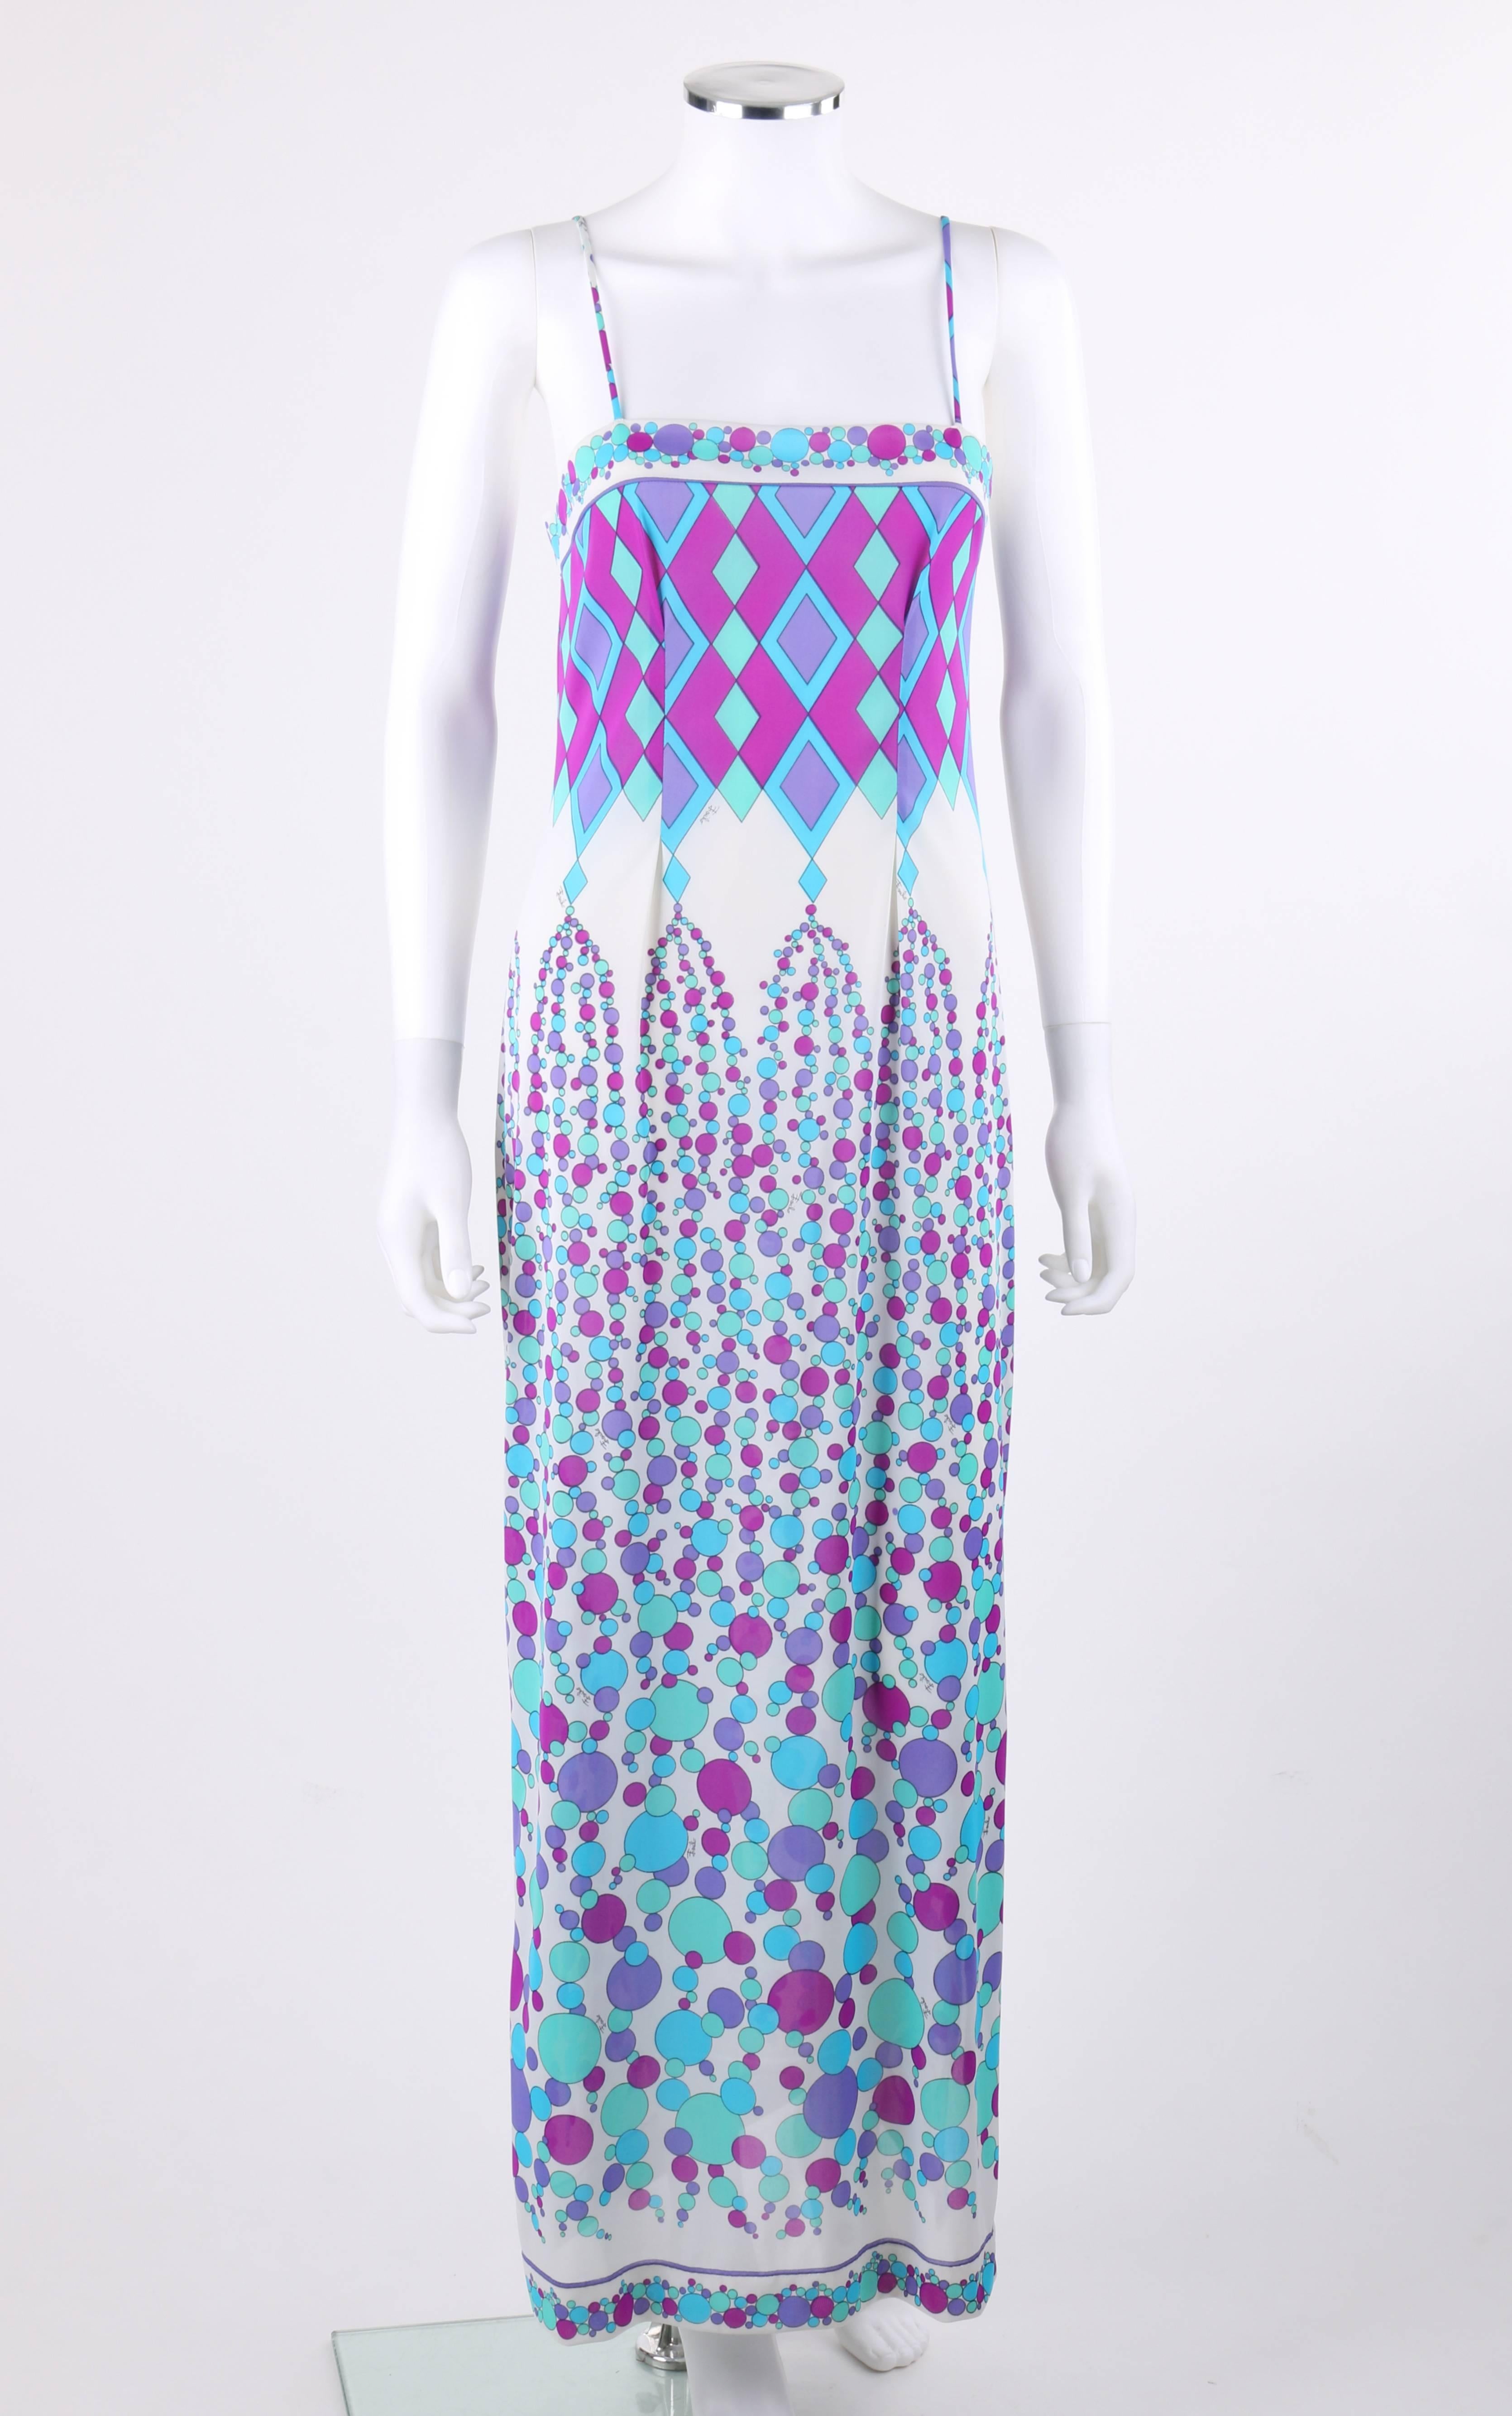 Vintage Emilio Pucci c.1970's blue multi-color geometric signature silk jersey print maxi slip dress in shades of blue, green, and purple on white. Geometric diamond print at bodice with descending bubble print from waist to hem. Multi-color bubble